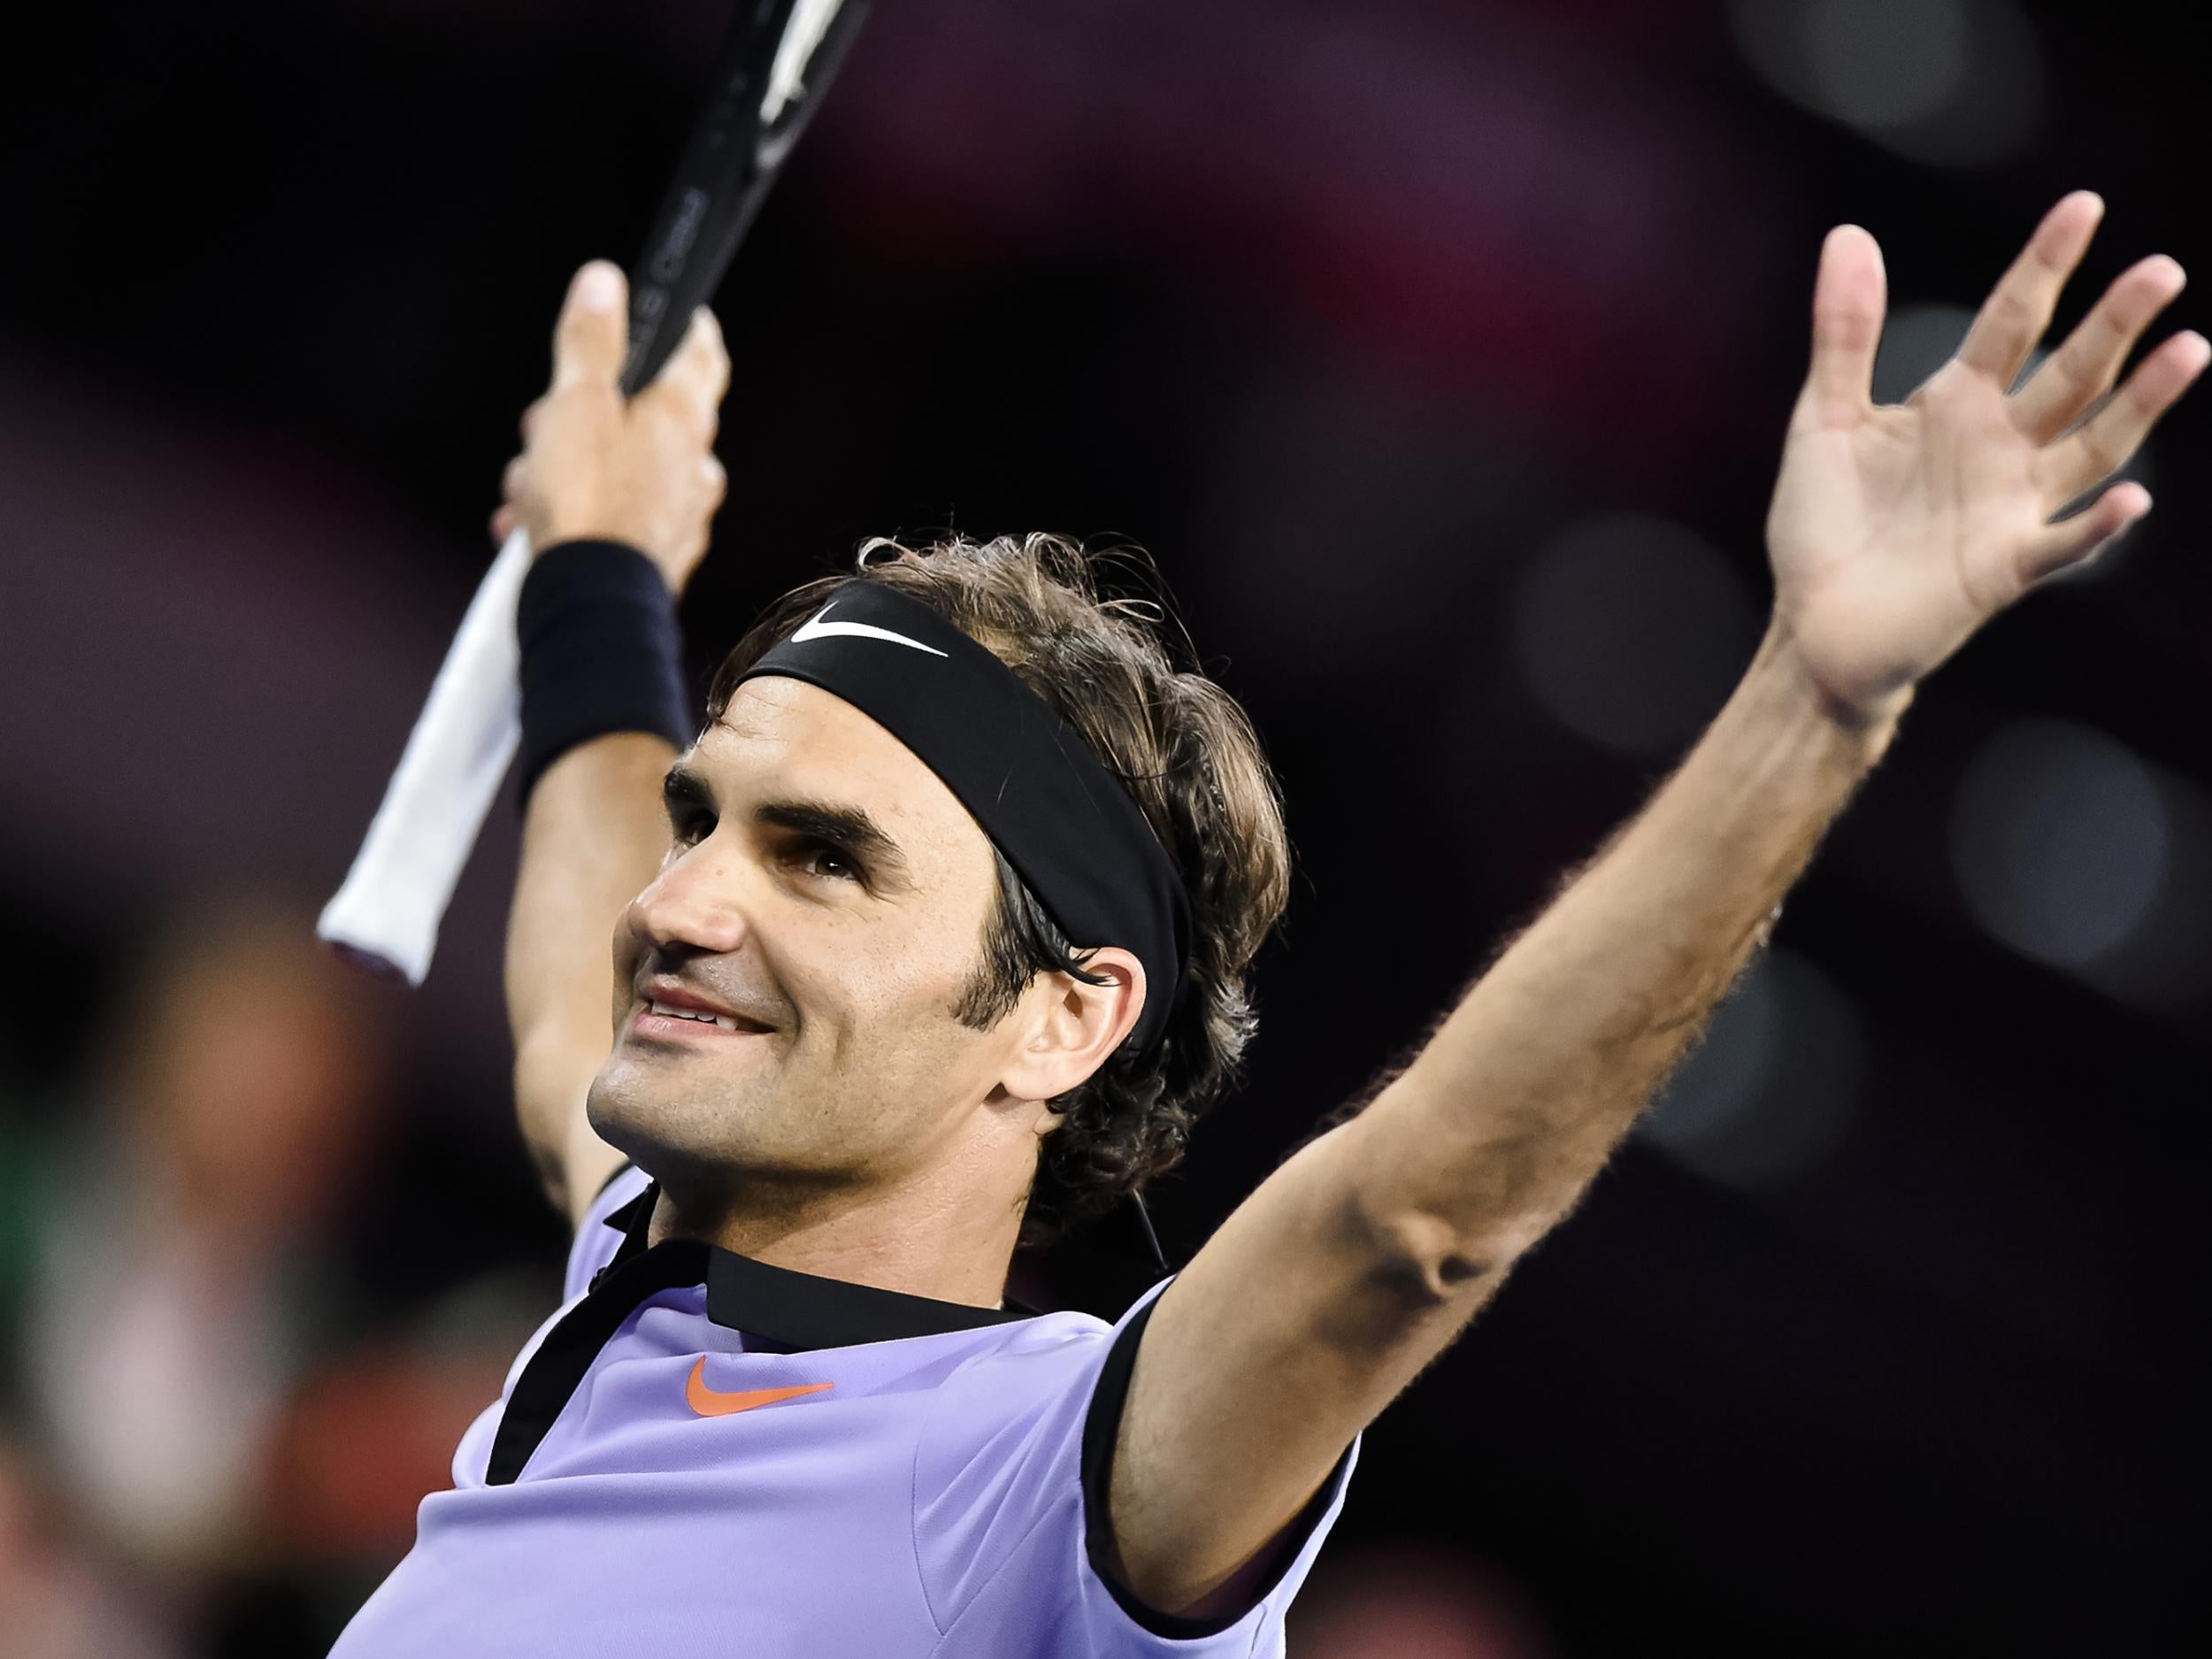 Federer has made an almost perfect start to the season